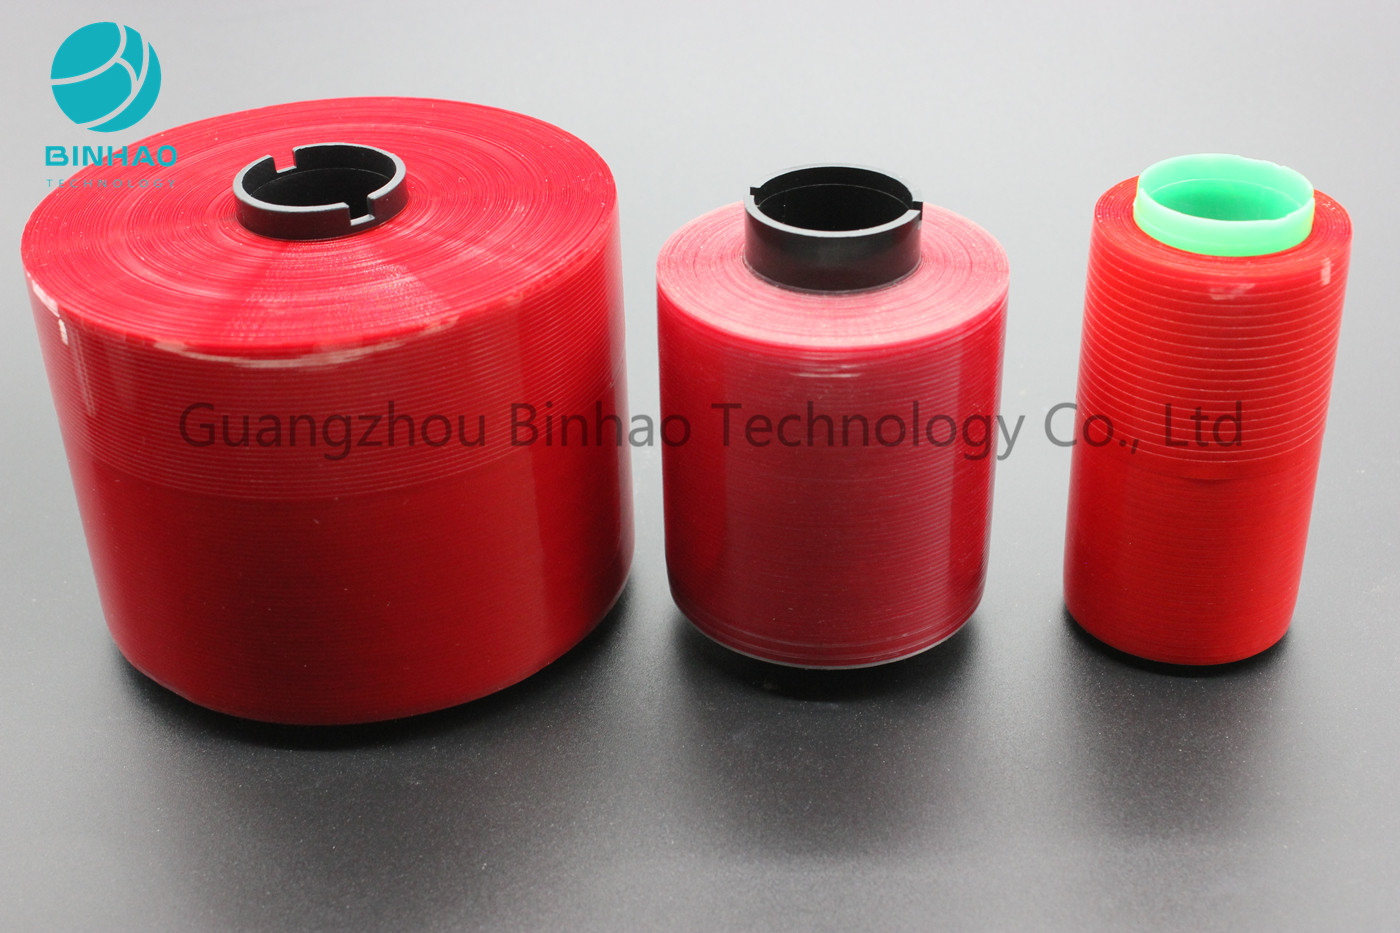 Customize Sealing Tear Resistant Tape For Shipping Envelopes , 2mm-5mm Width